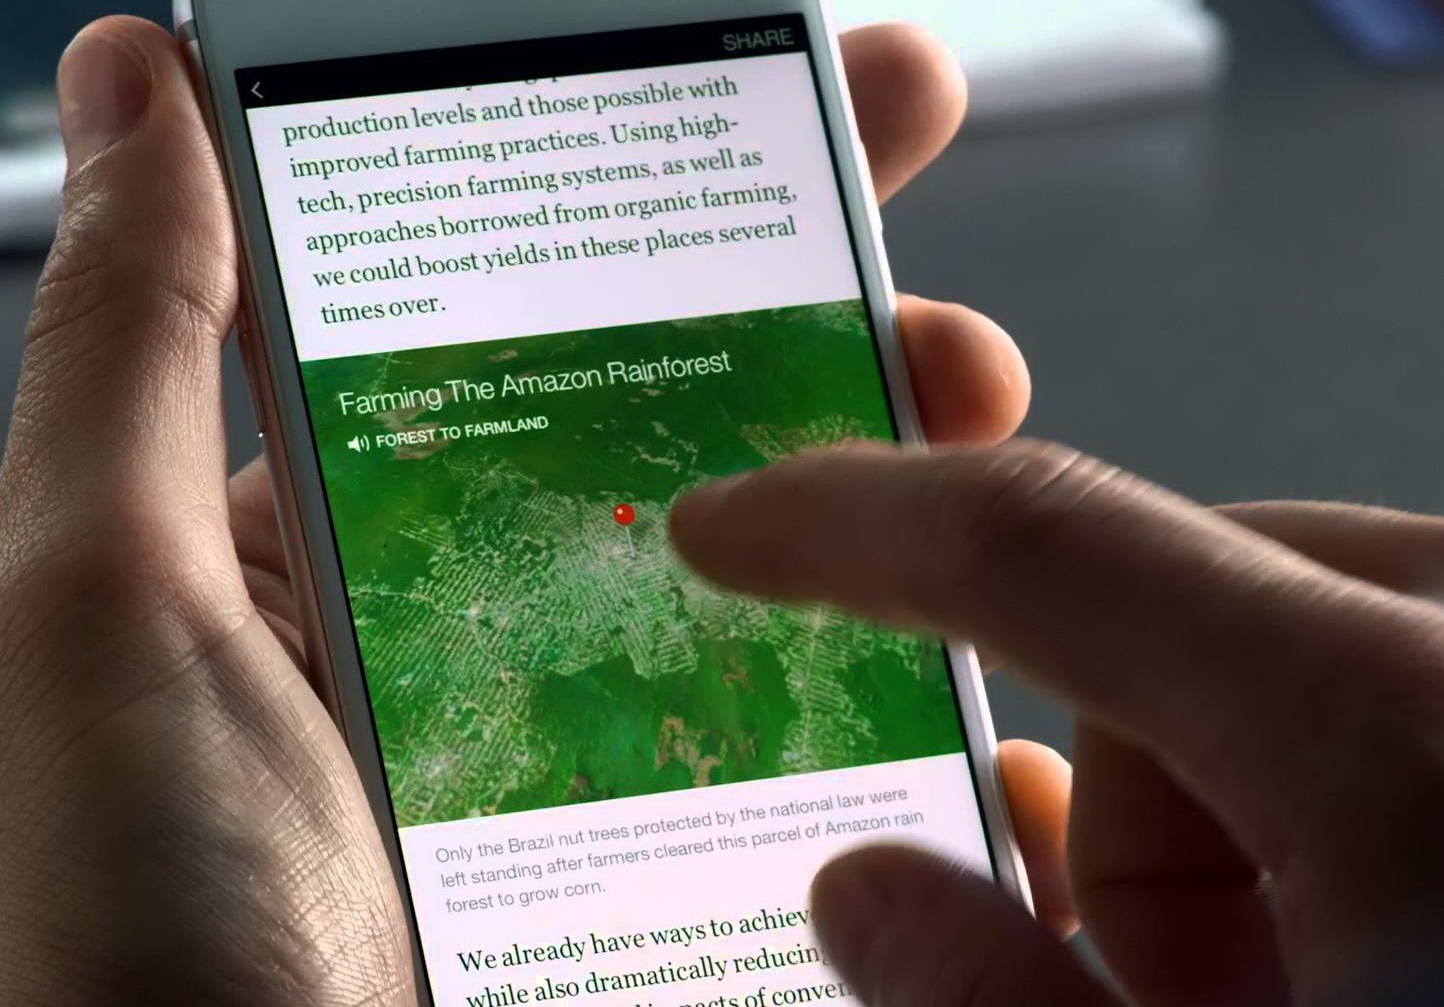 Instant Articles